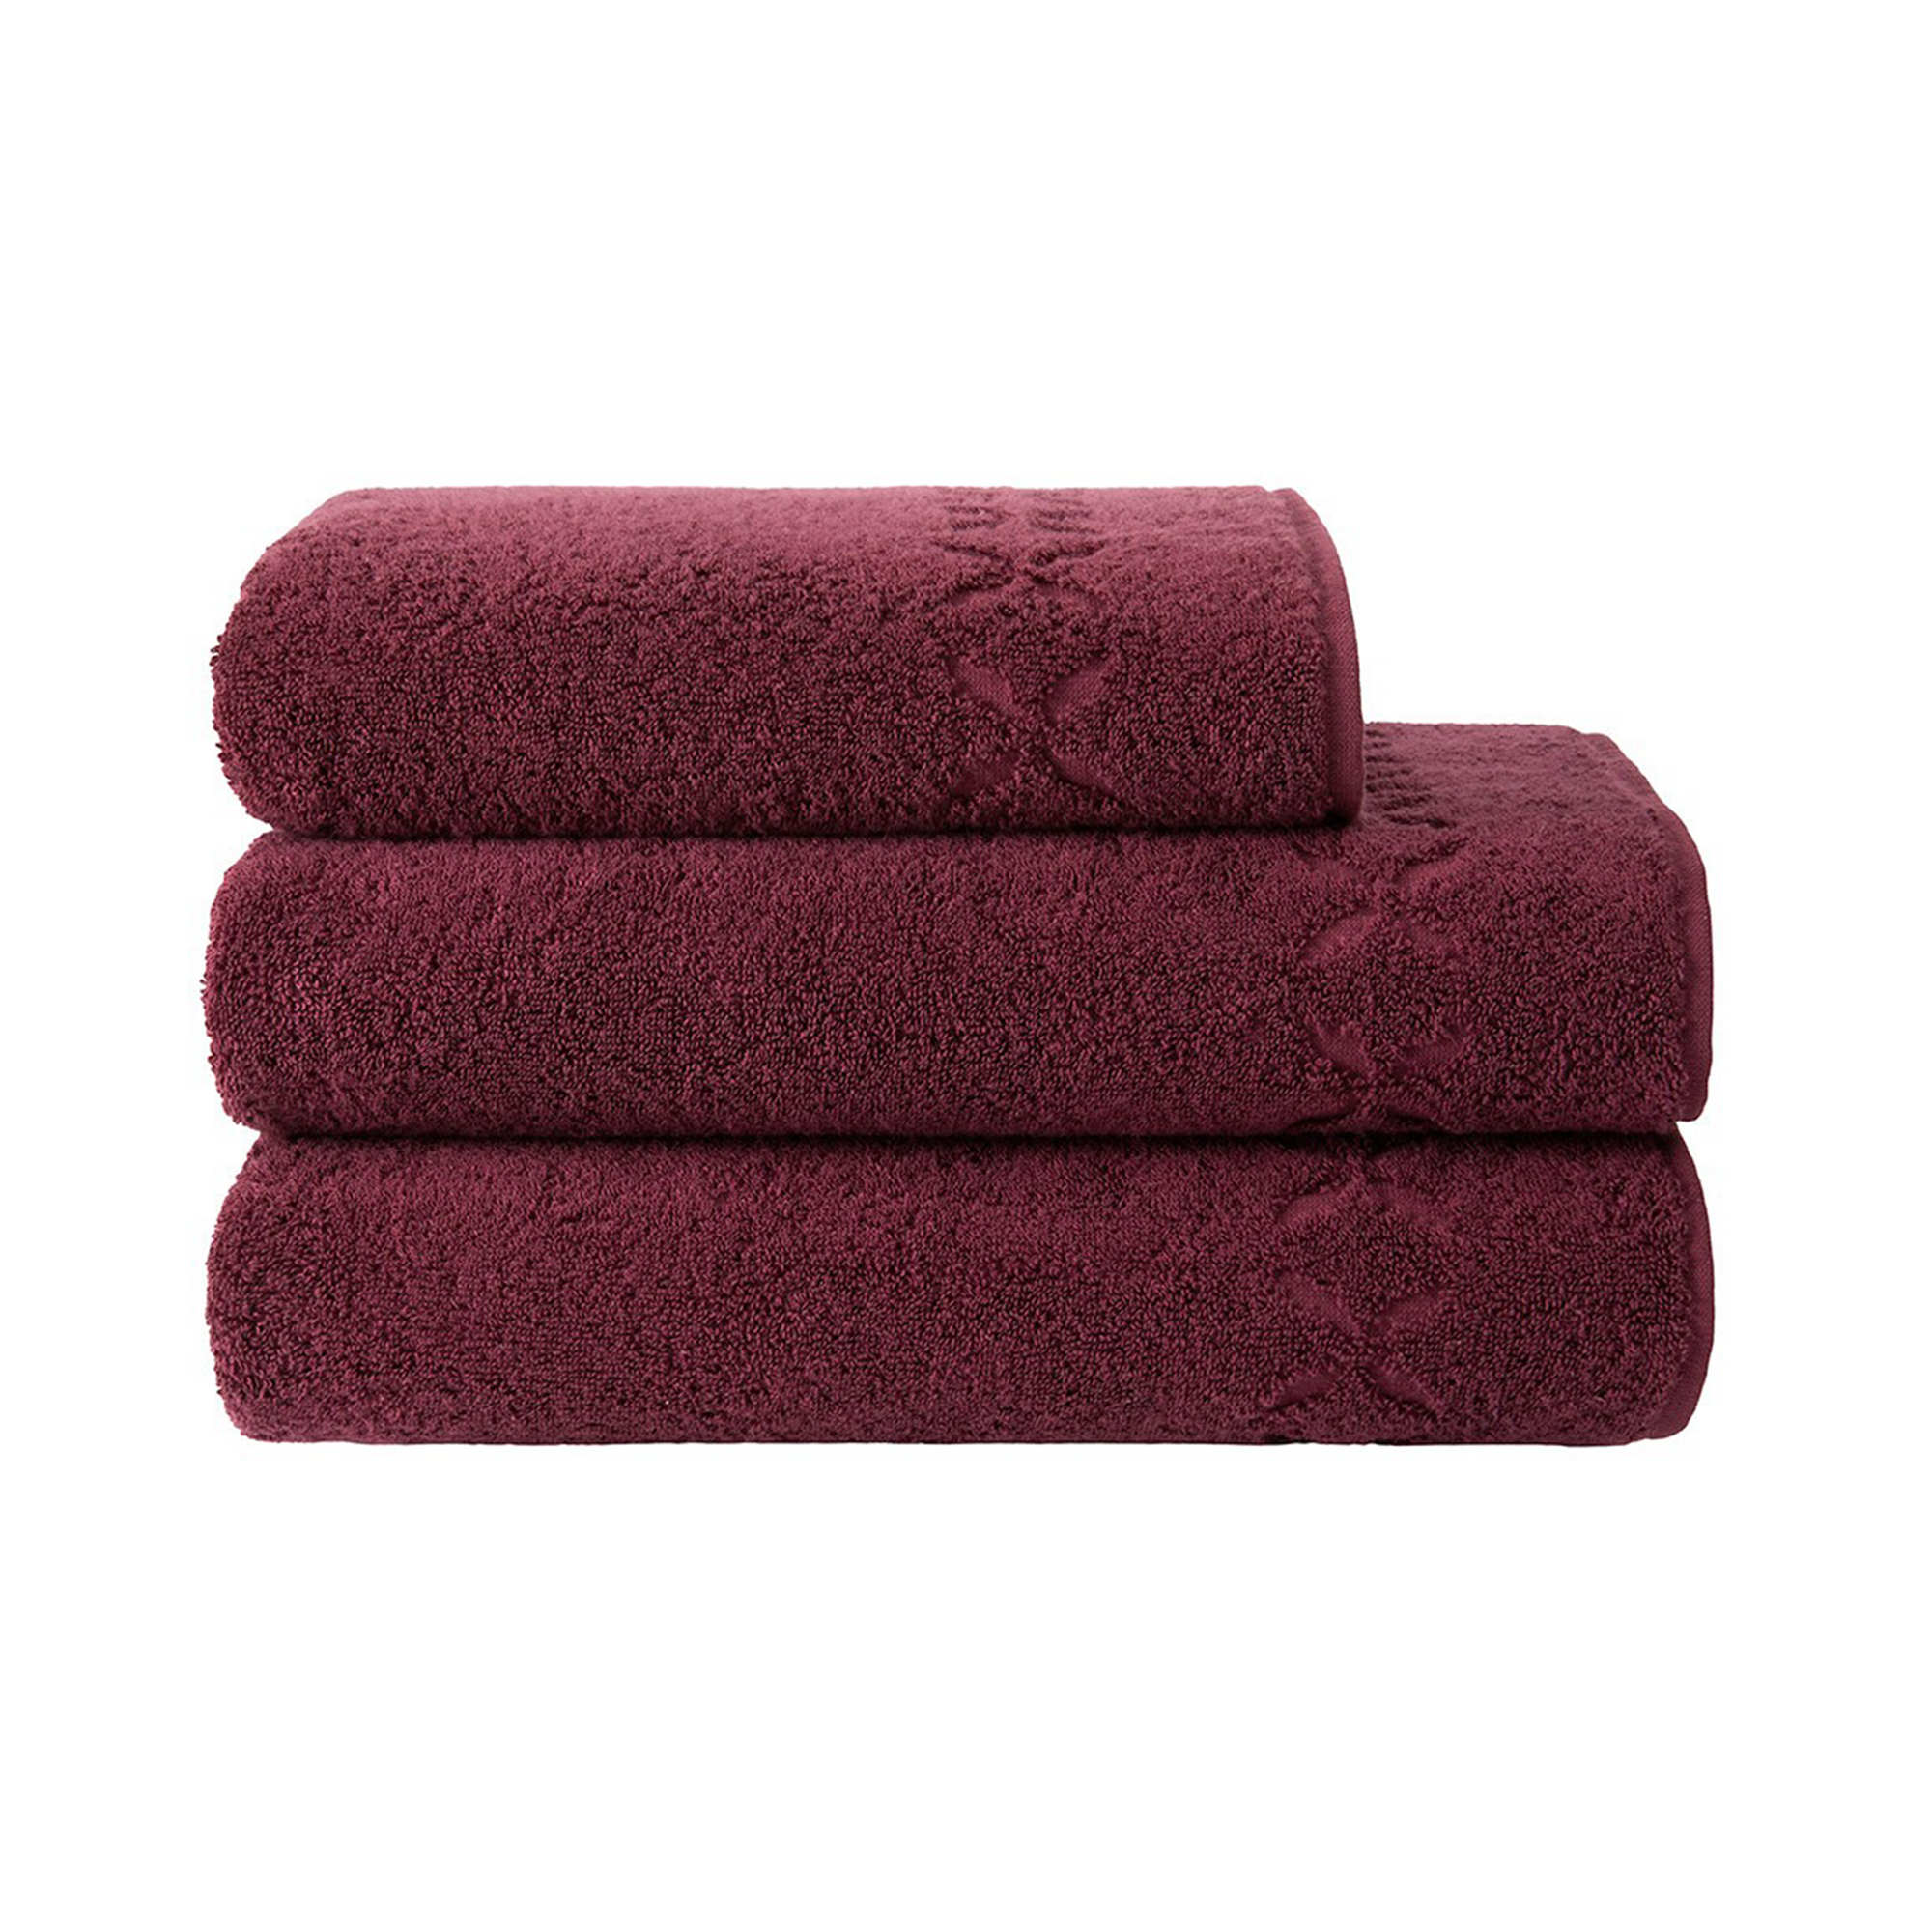 Folded Silo of Yves Delorme Nature Bath Towels in Prune Color